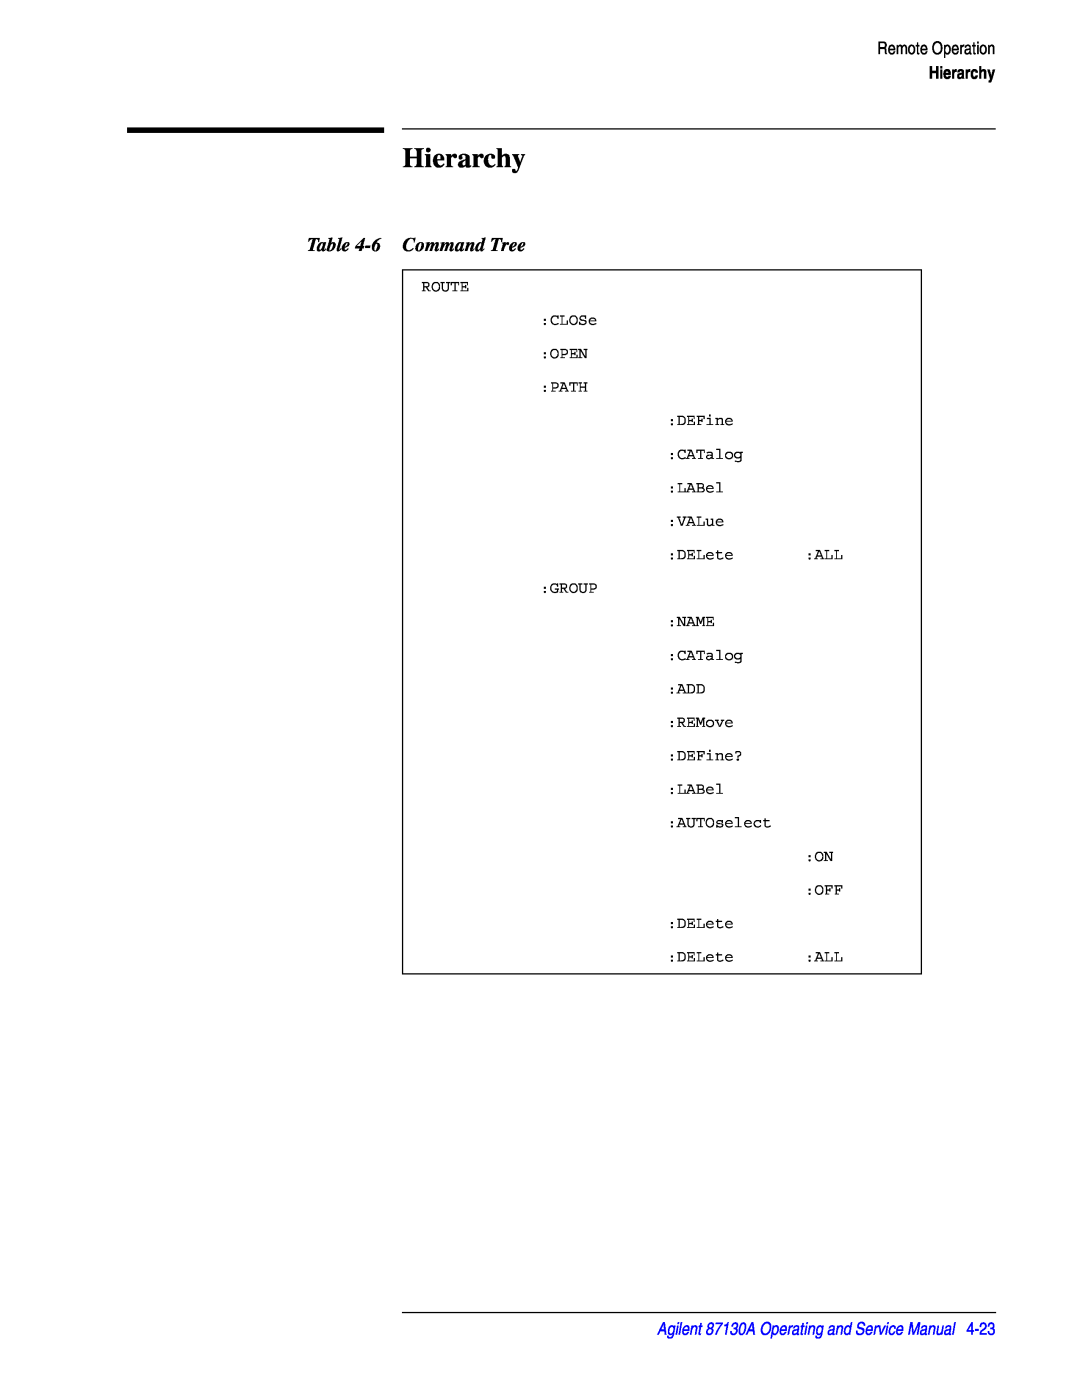 Agilent Technologies manual Hierarchy, 6 Command Tree, Remote Operation, Agilent 87130A Operating and Service Manual 